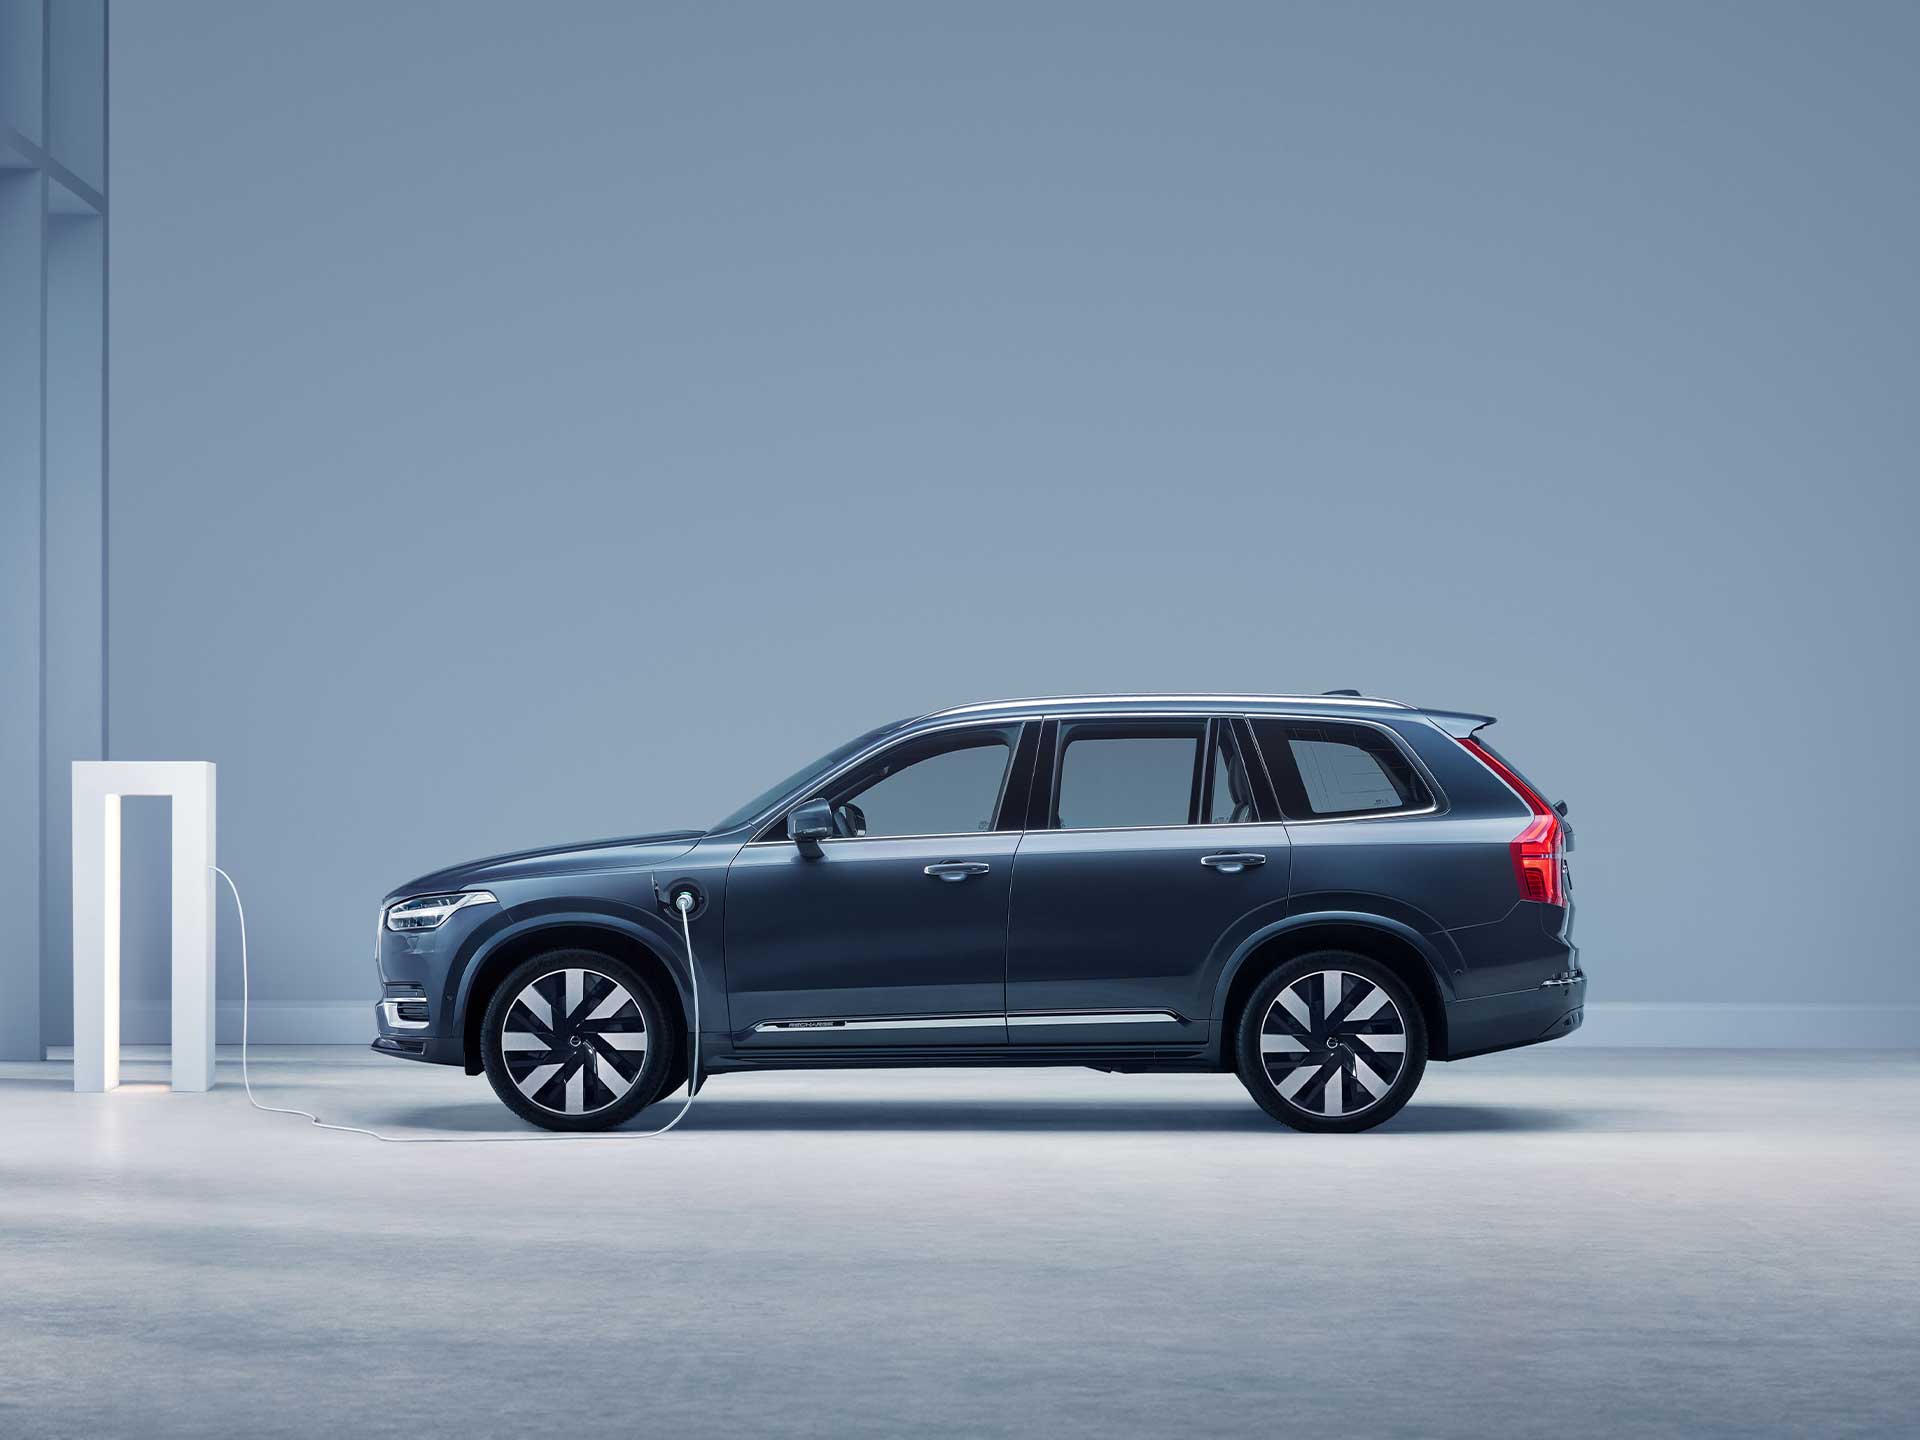 XC90 - Overview | Volvo Cars - International